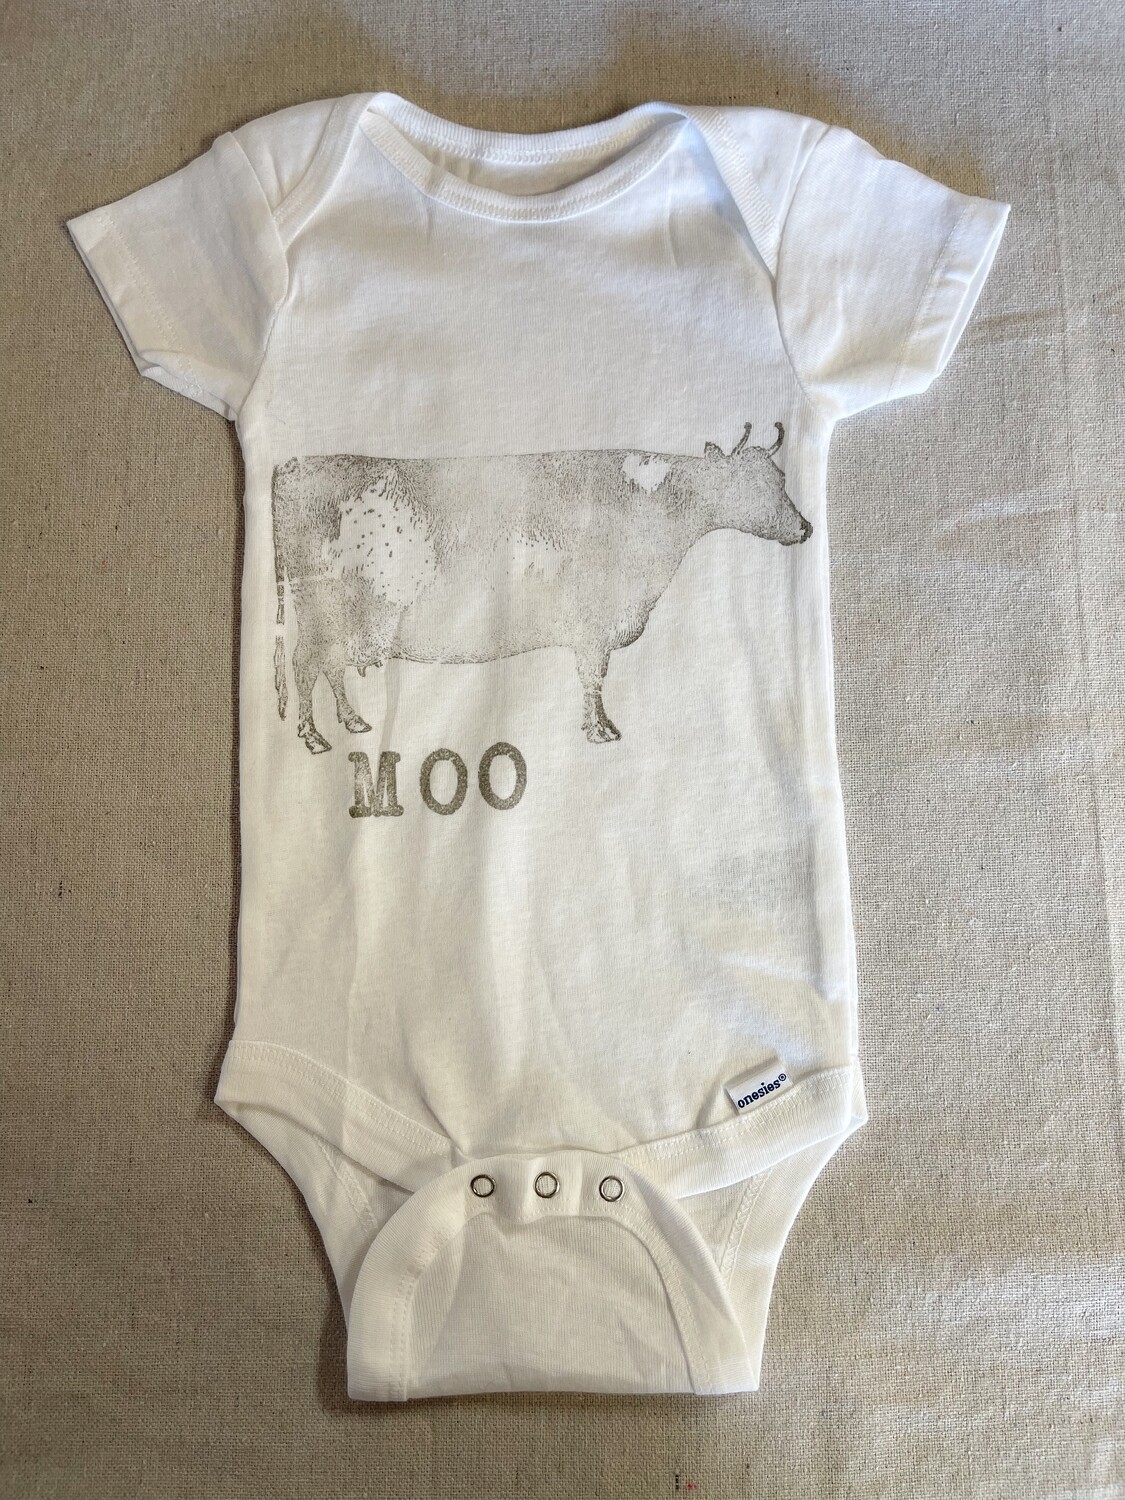 Cow Printed Baby One-Piece 6-9 Months Short Sleeve